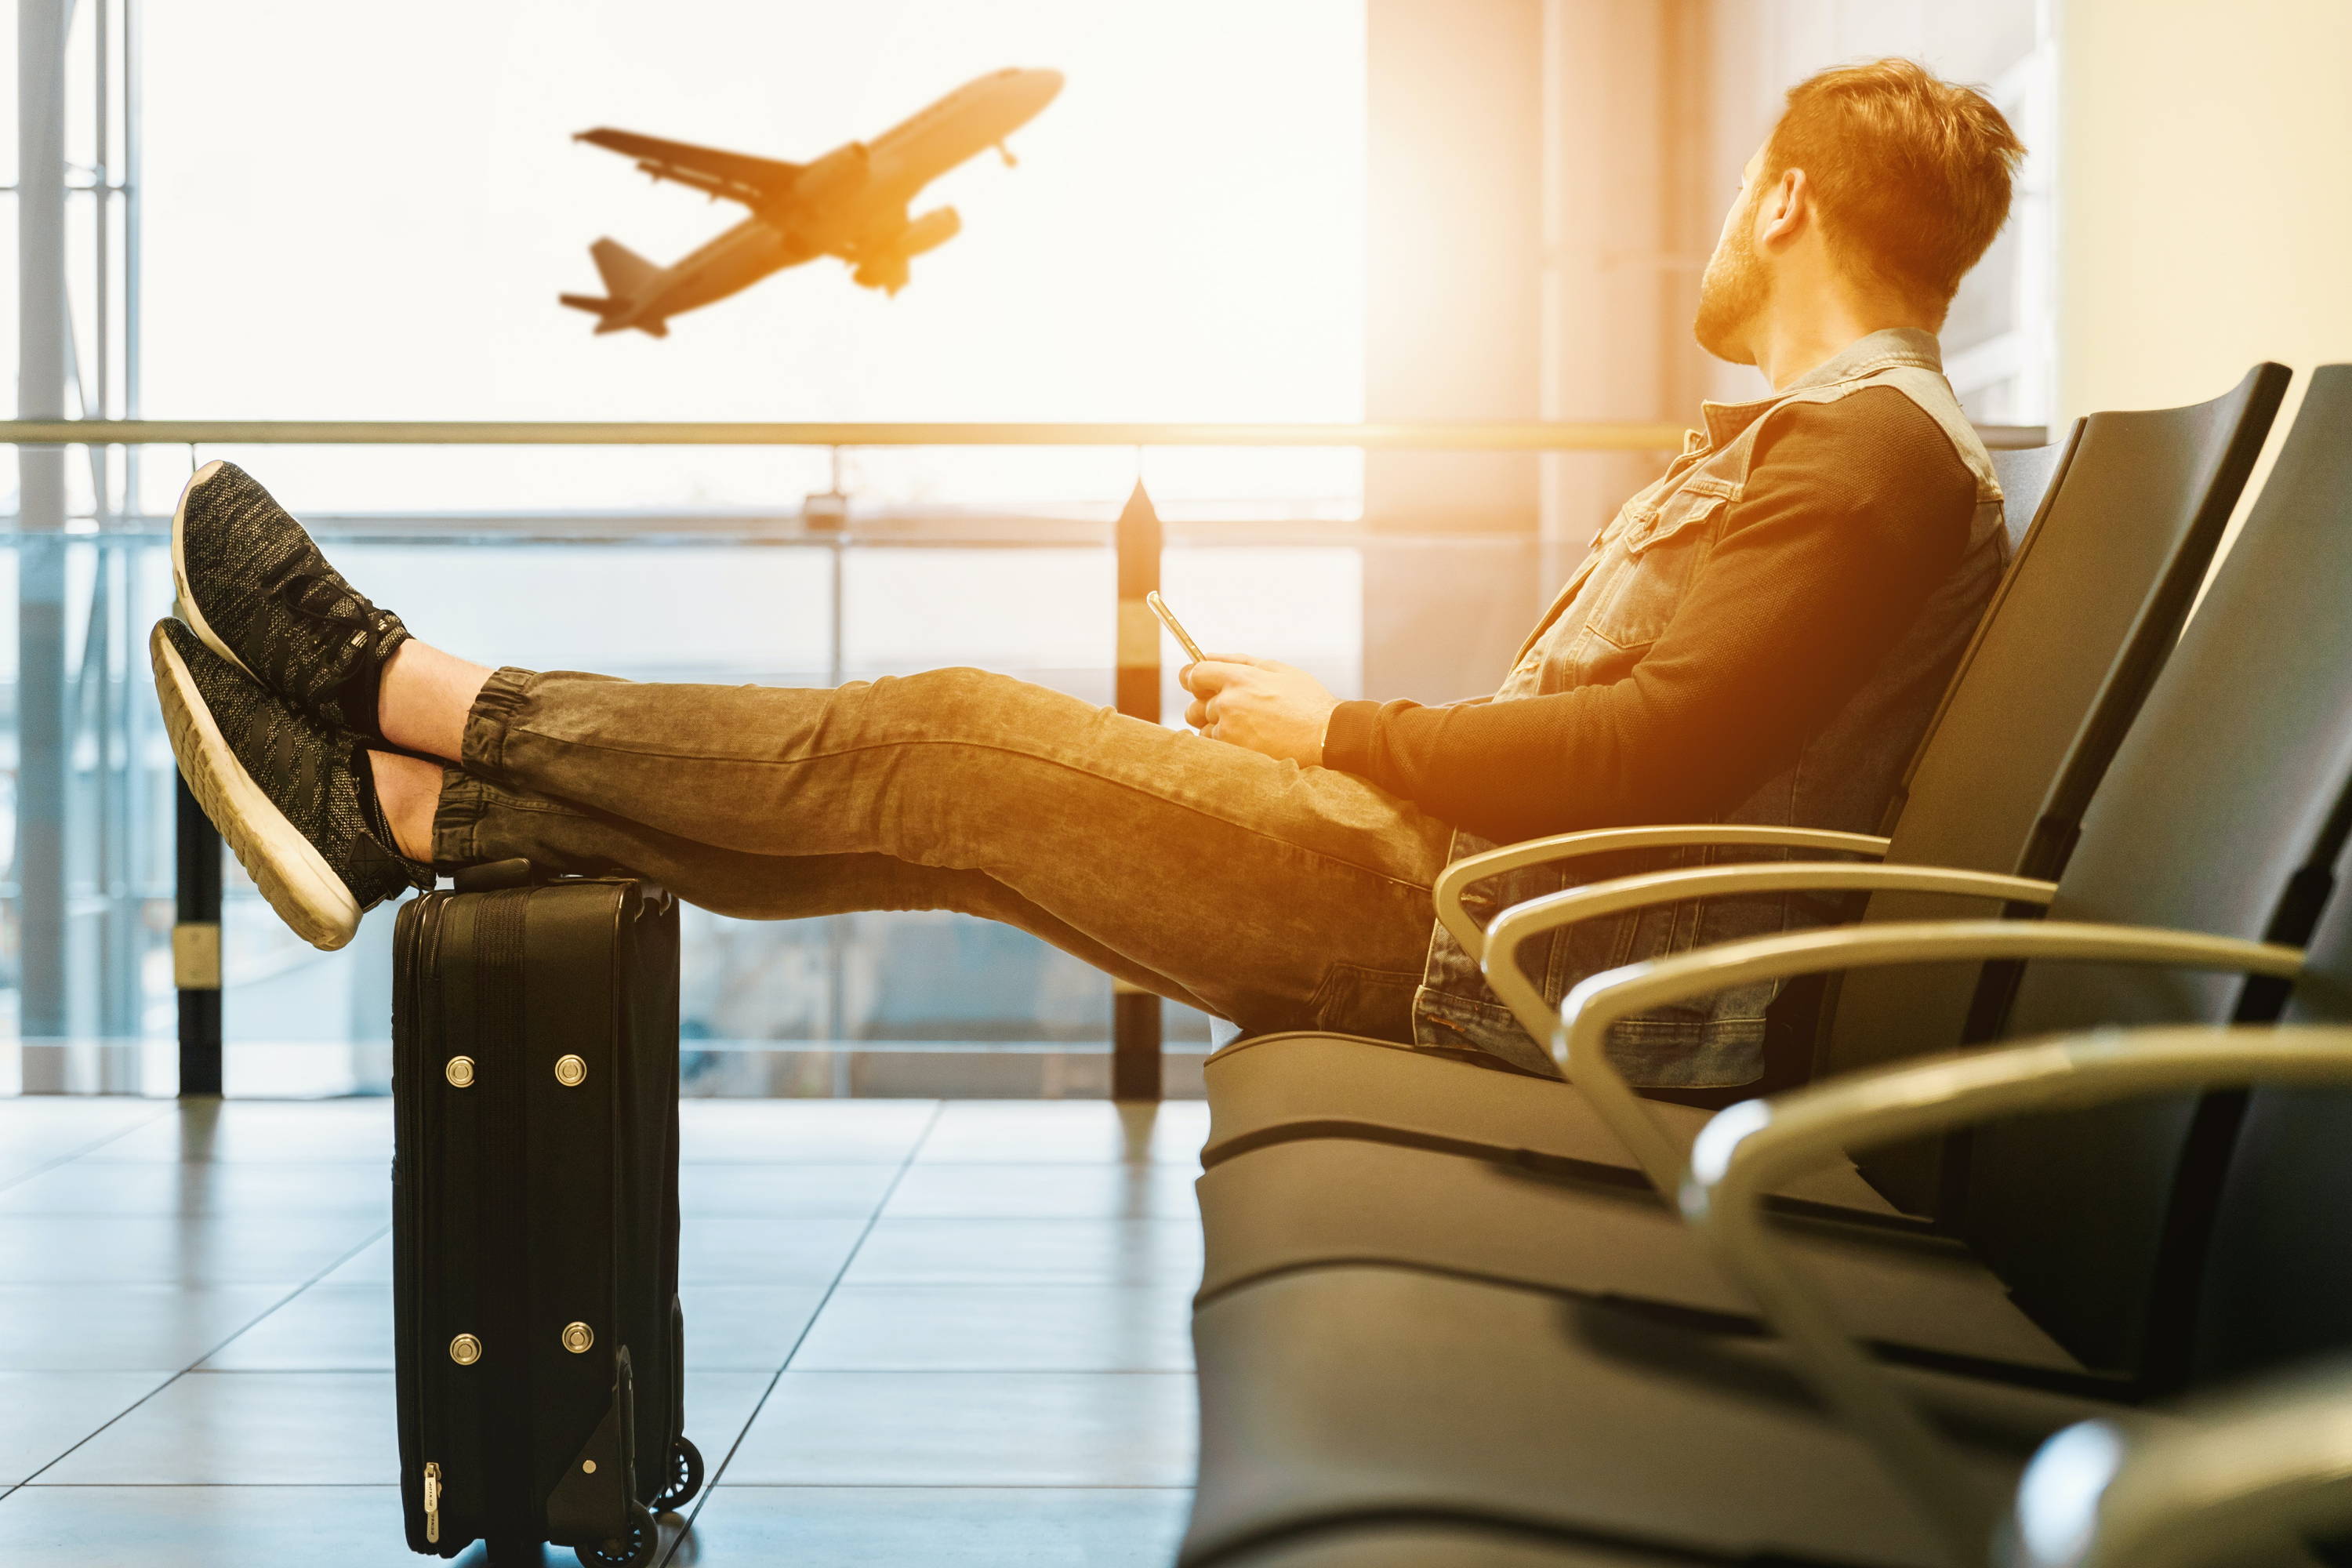 man resting in airport lounge with feet up watching planes take off